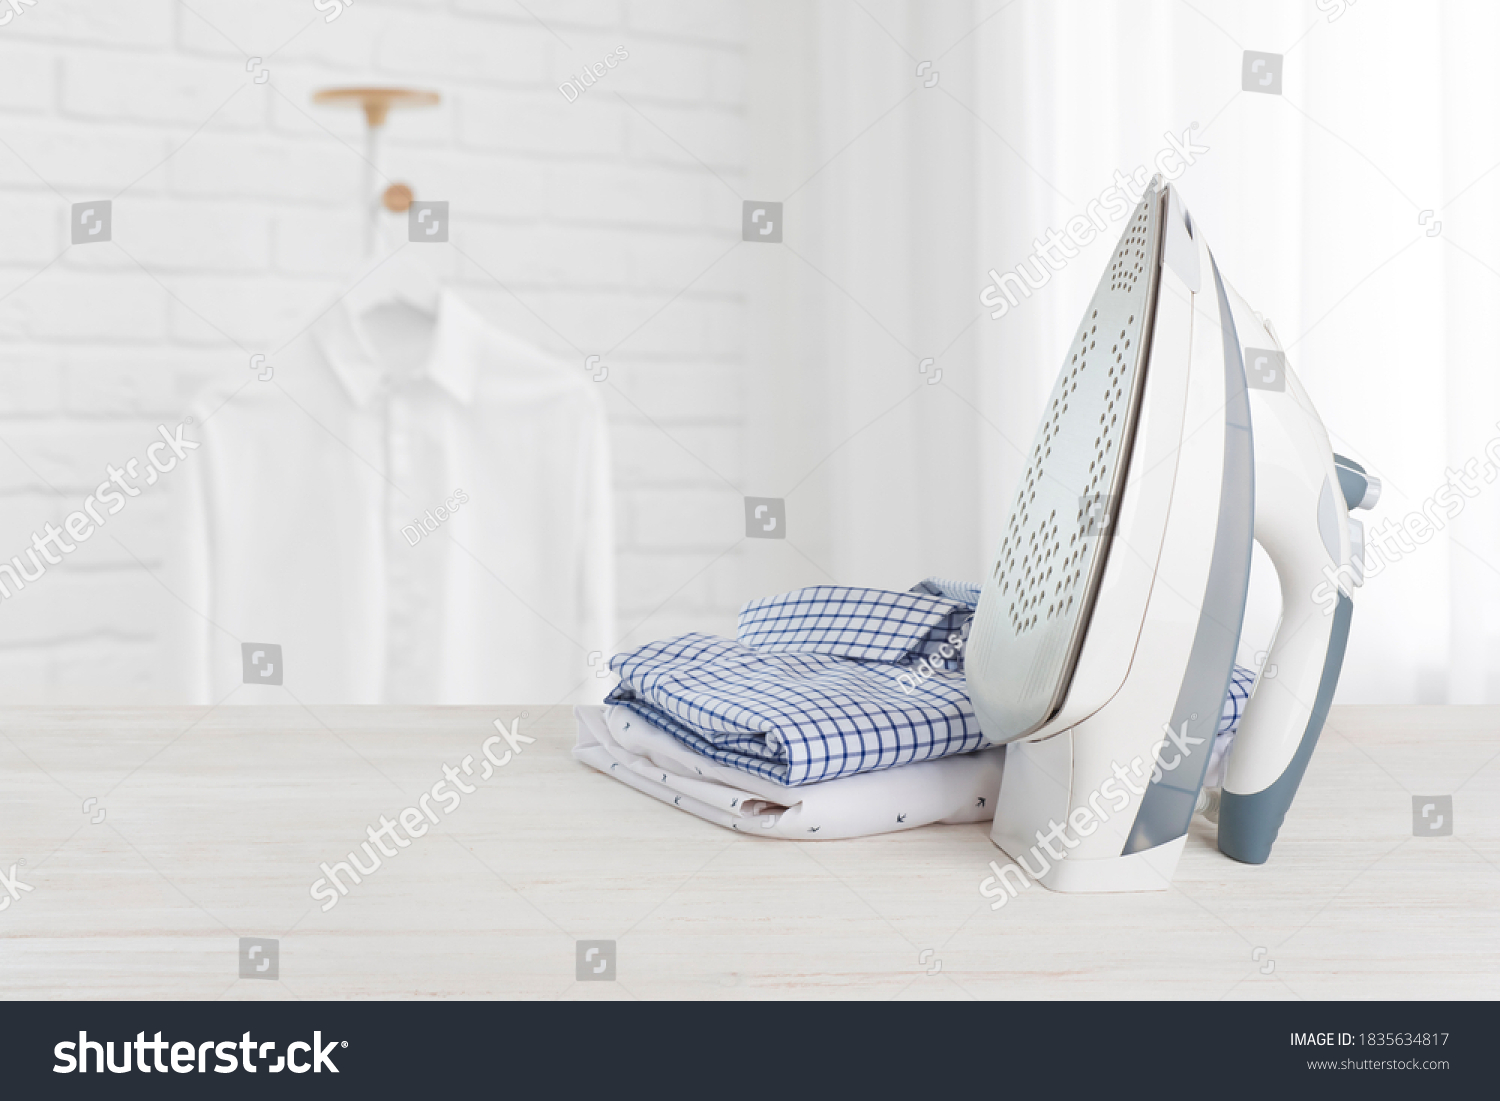 Iron on wooden board with clothes, ironing board household concept #1835634817